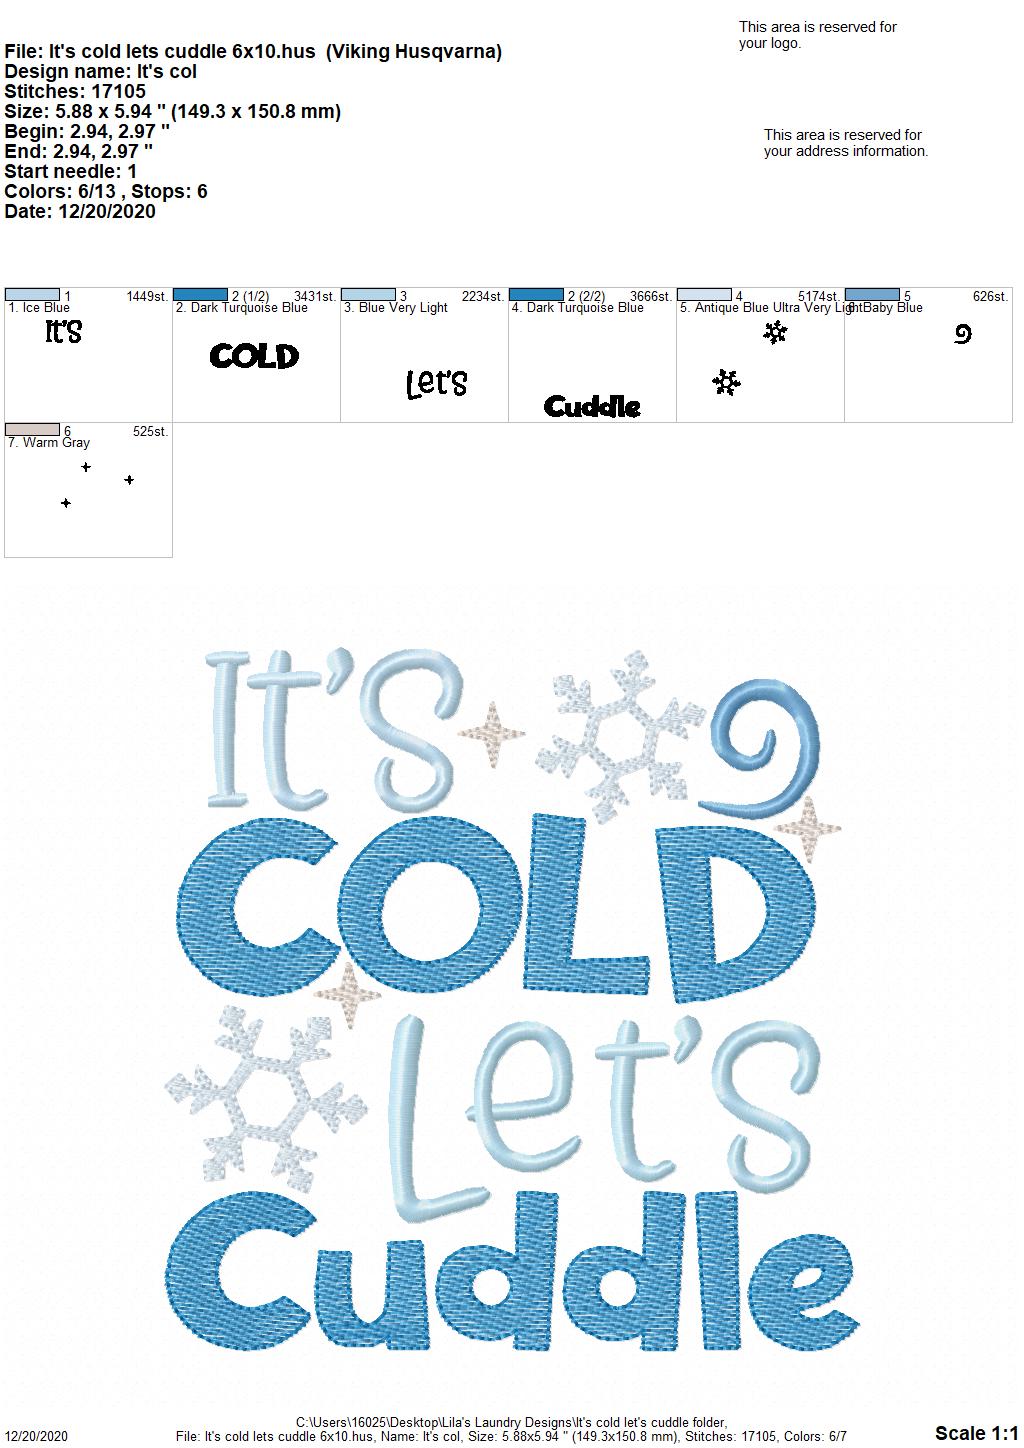 It's Cold Let's Cuddle - 3 sizes- Digital Embroidery Design